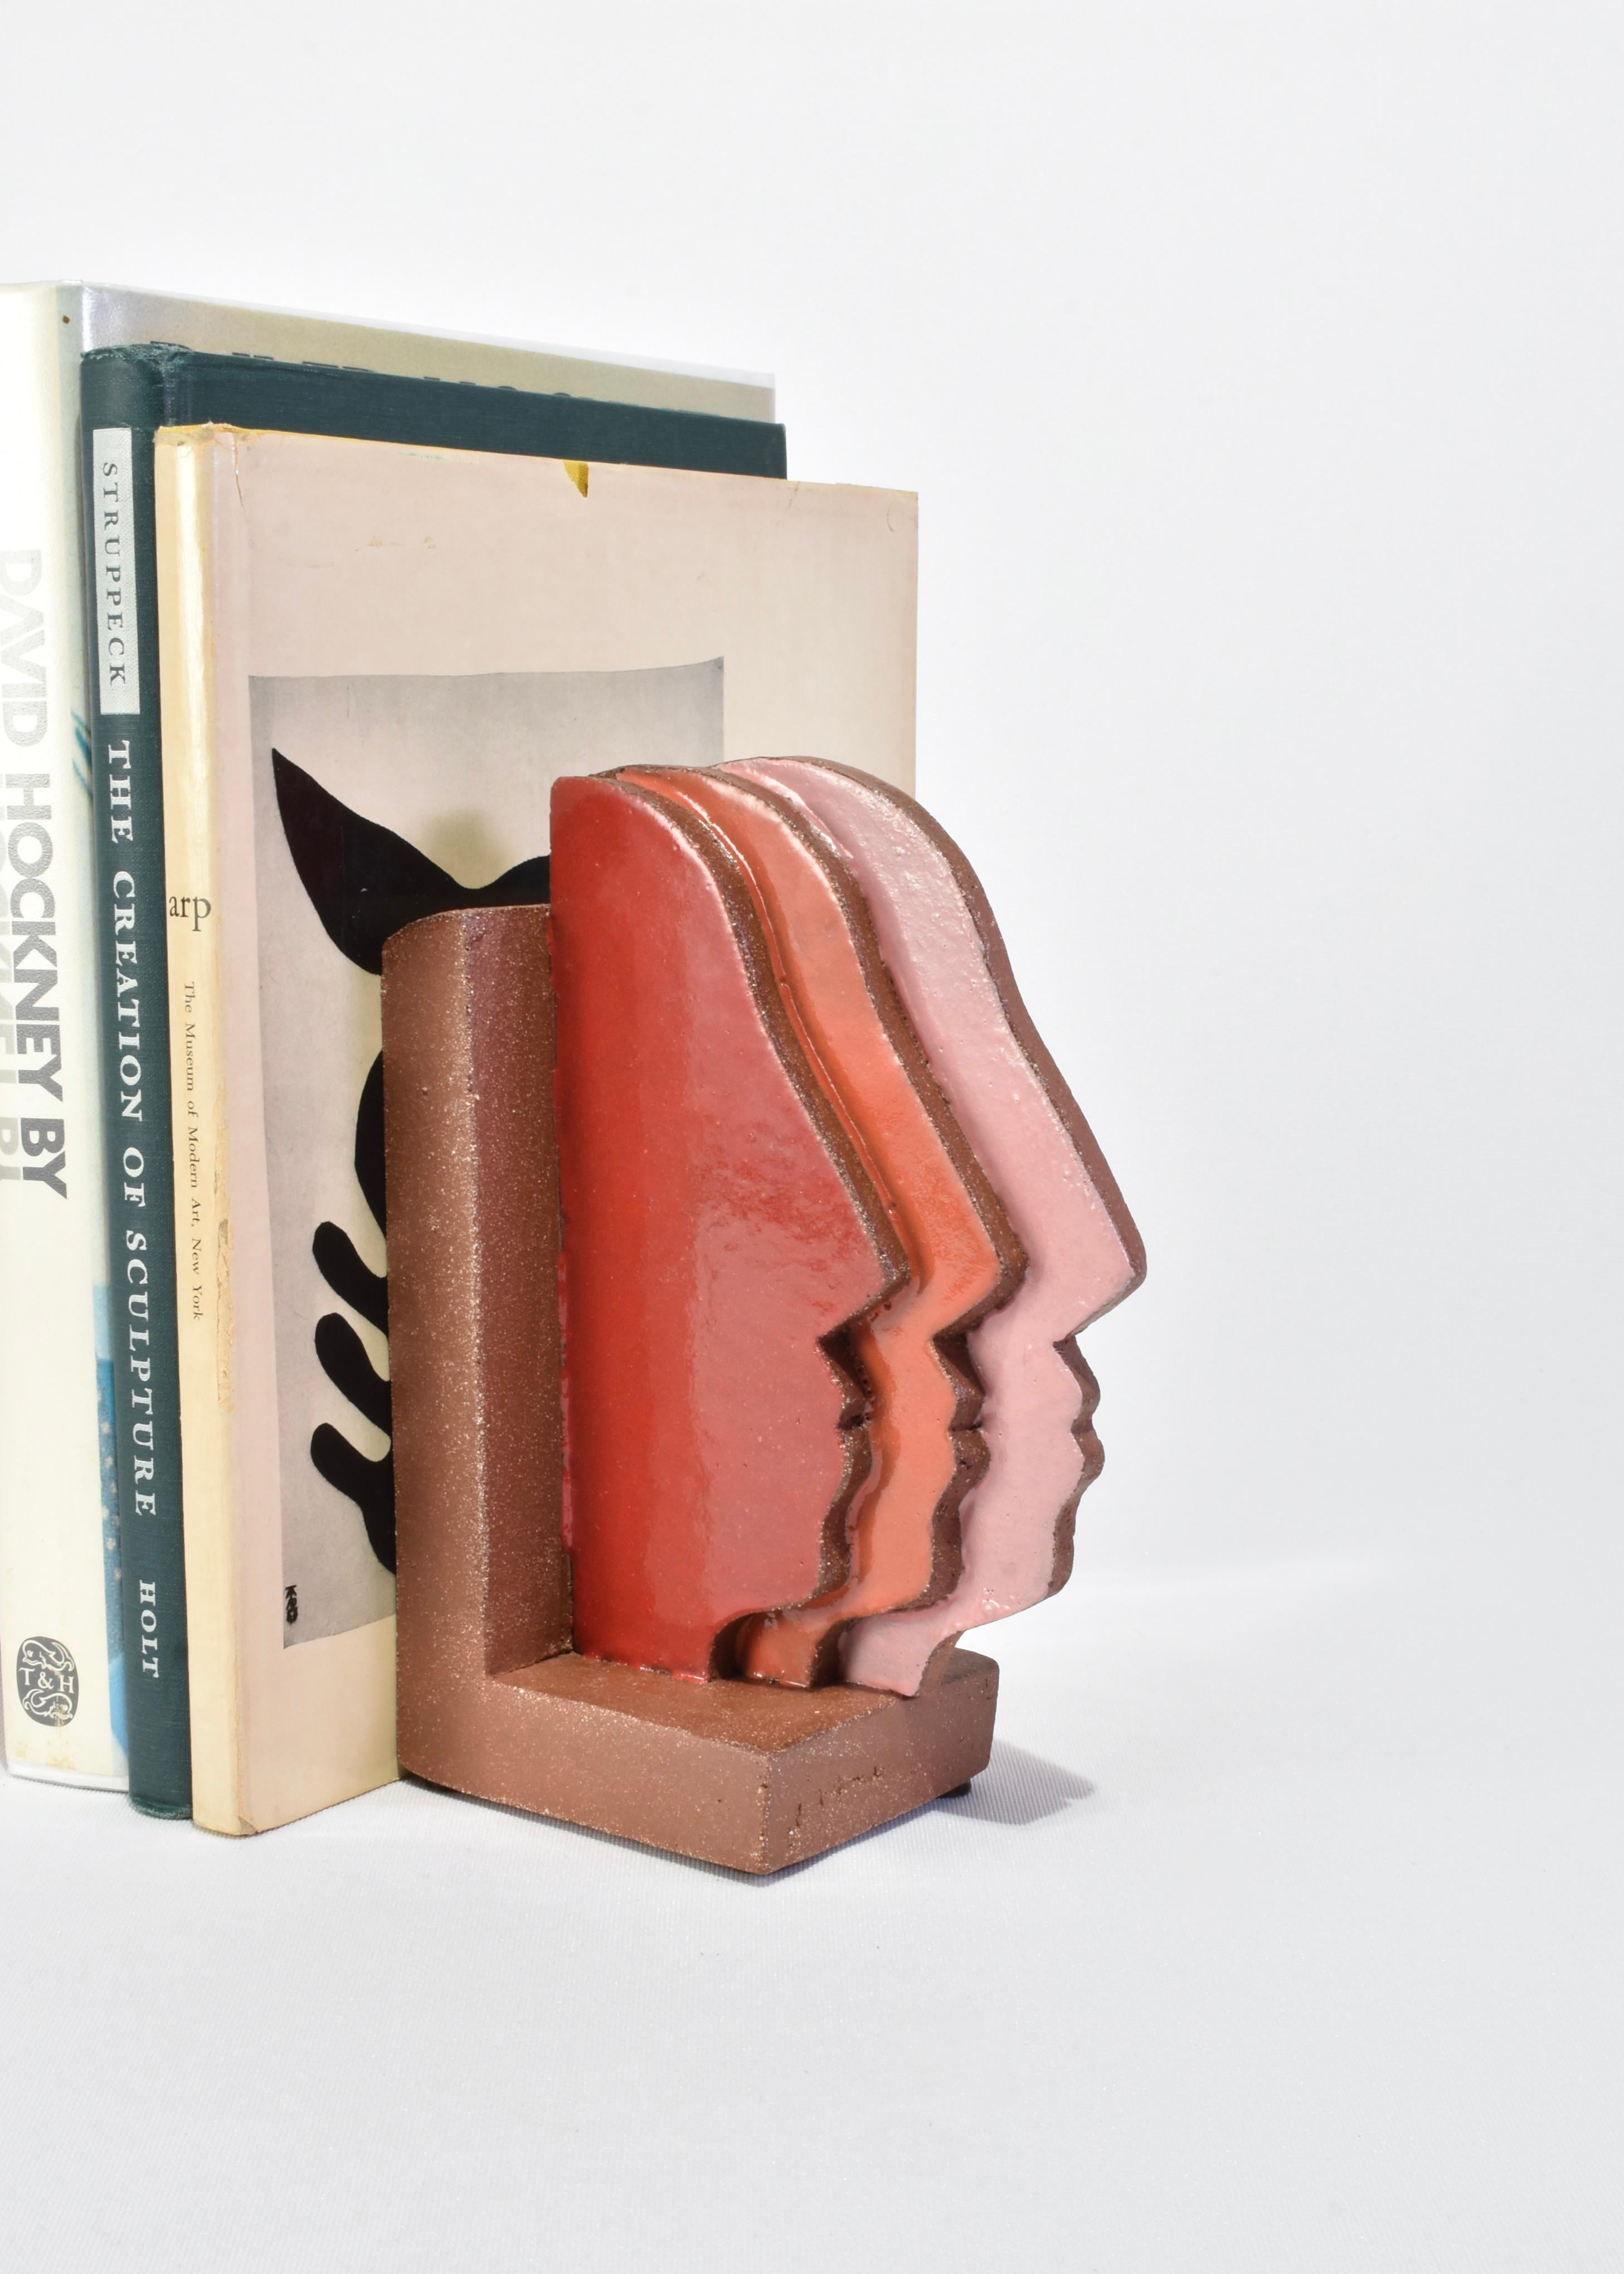 Handmade slab-built bookends with a multiple face profile design in red, orange, and pink, set of two.

Please note that this item is handmade and therefore unique; slight variations in color and shape are to be expected.